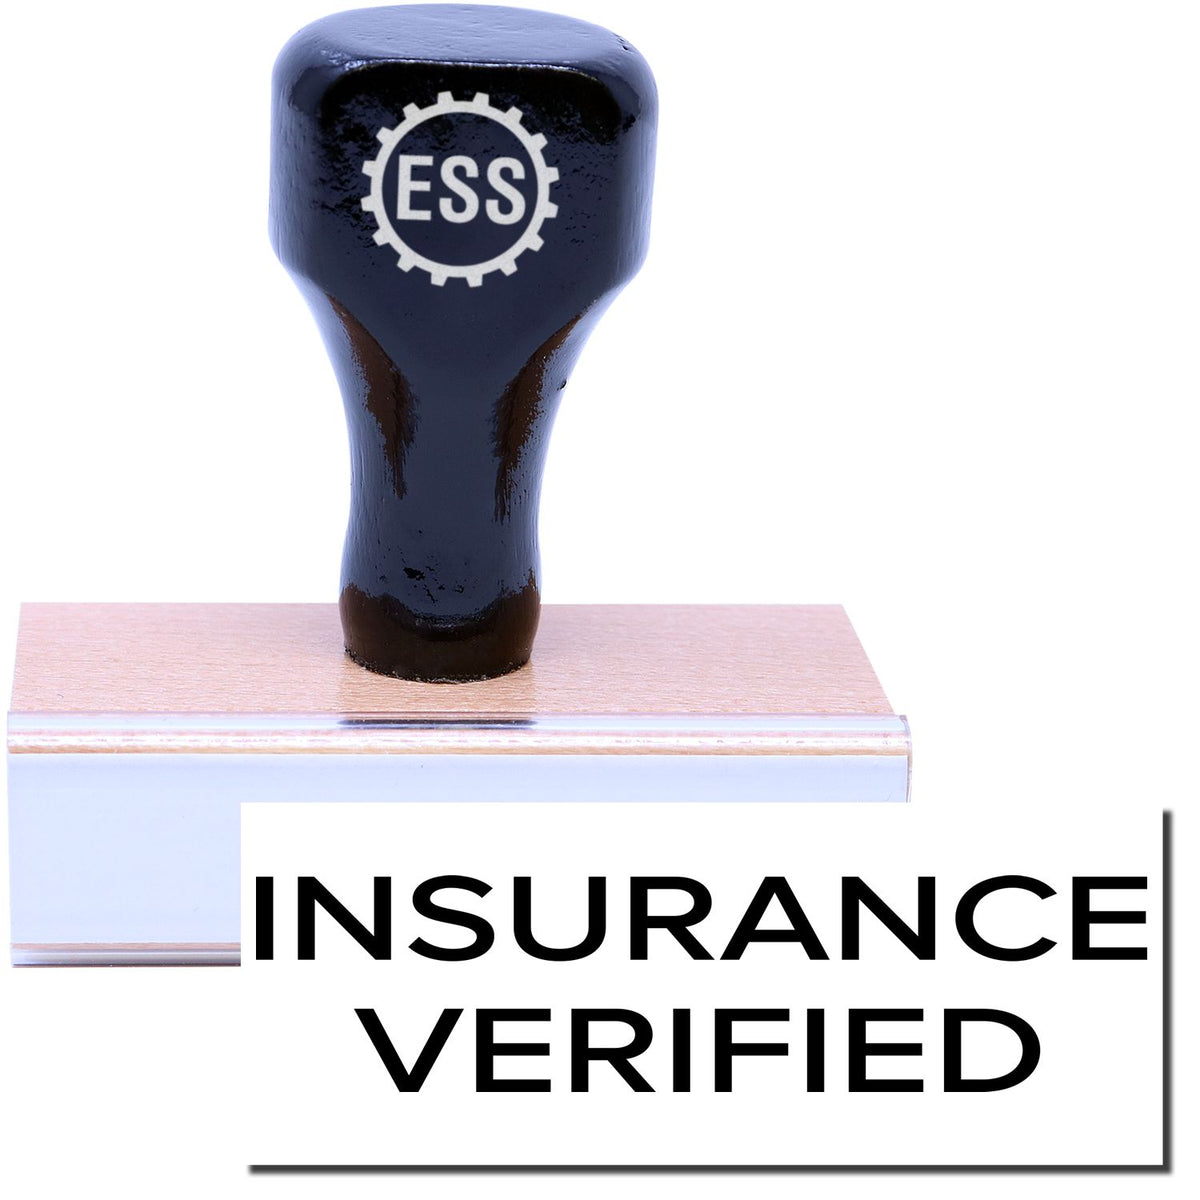 A stock office rubber stamp with a stamped image showing how the text &quot;INSURANCE VERIFIED&quot; in a large narrow font is displayed after stamping.